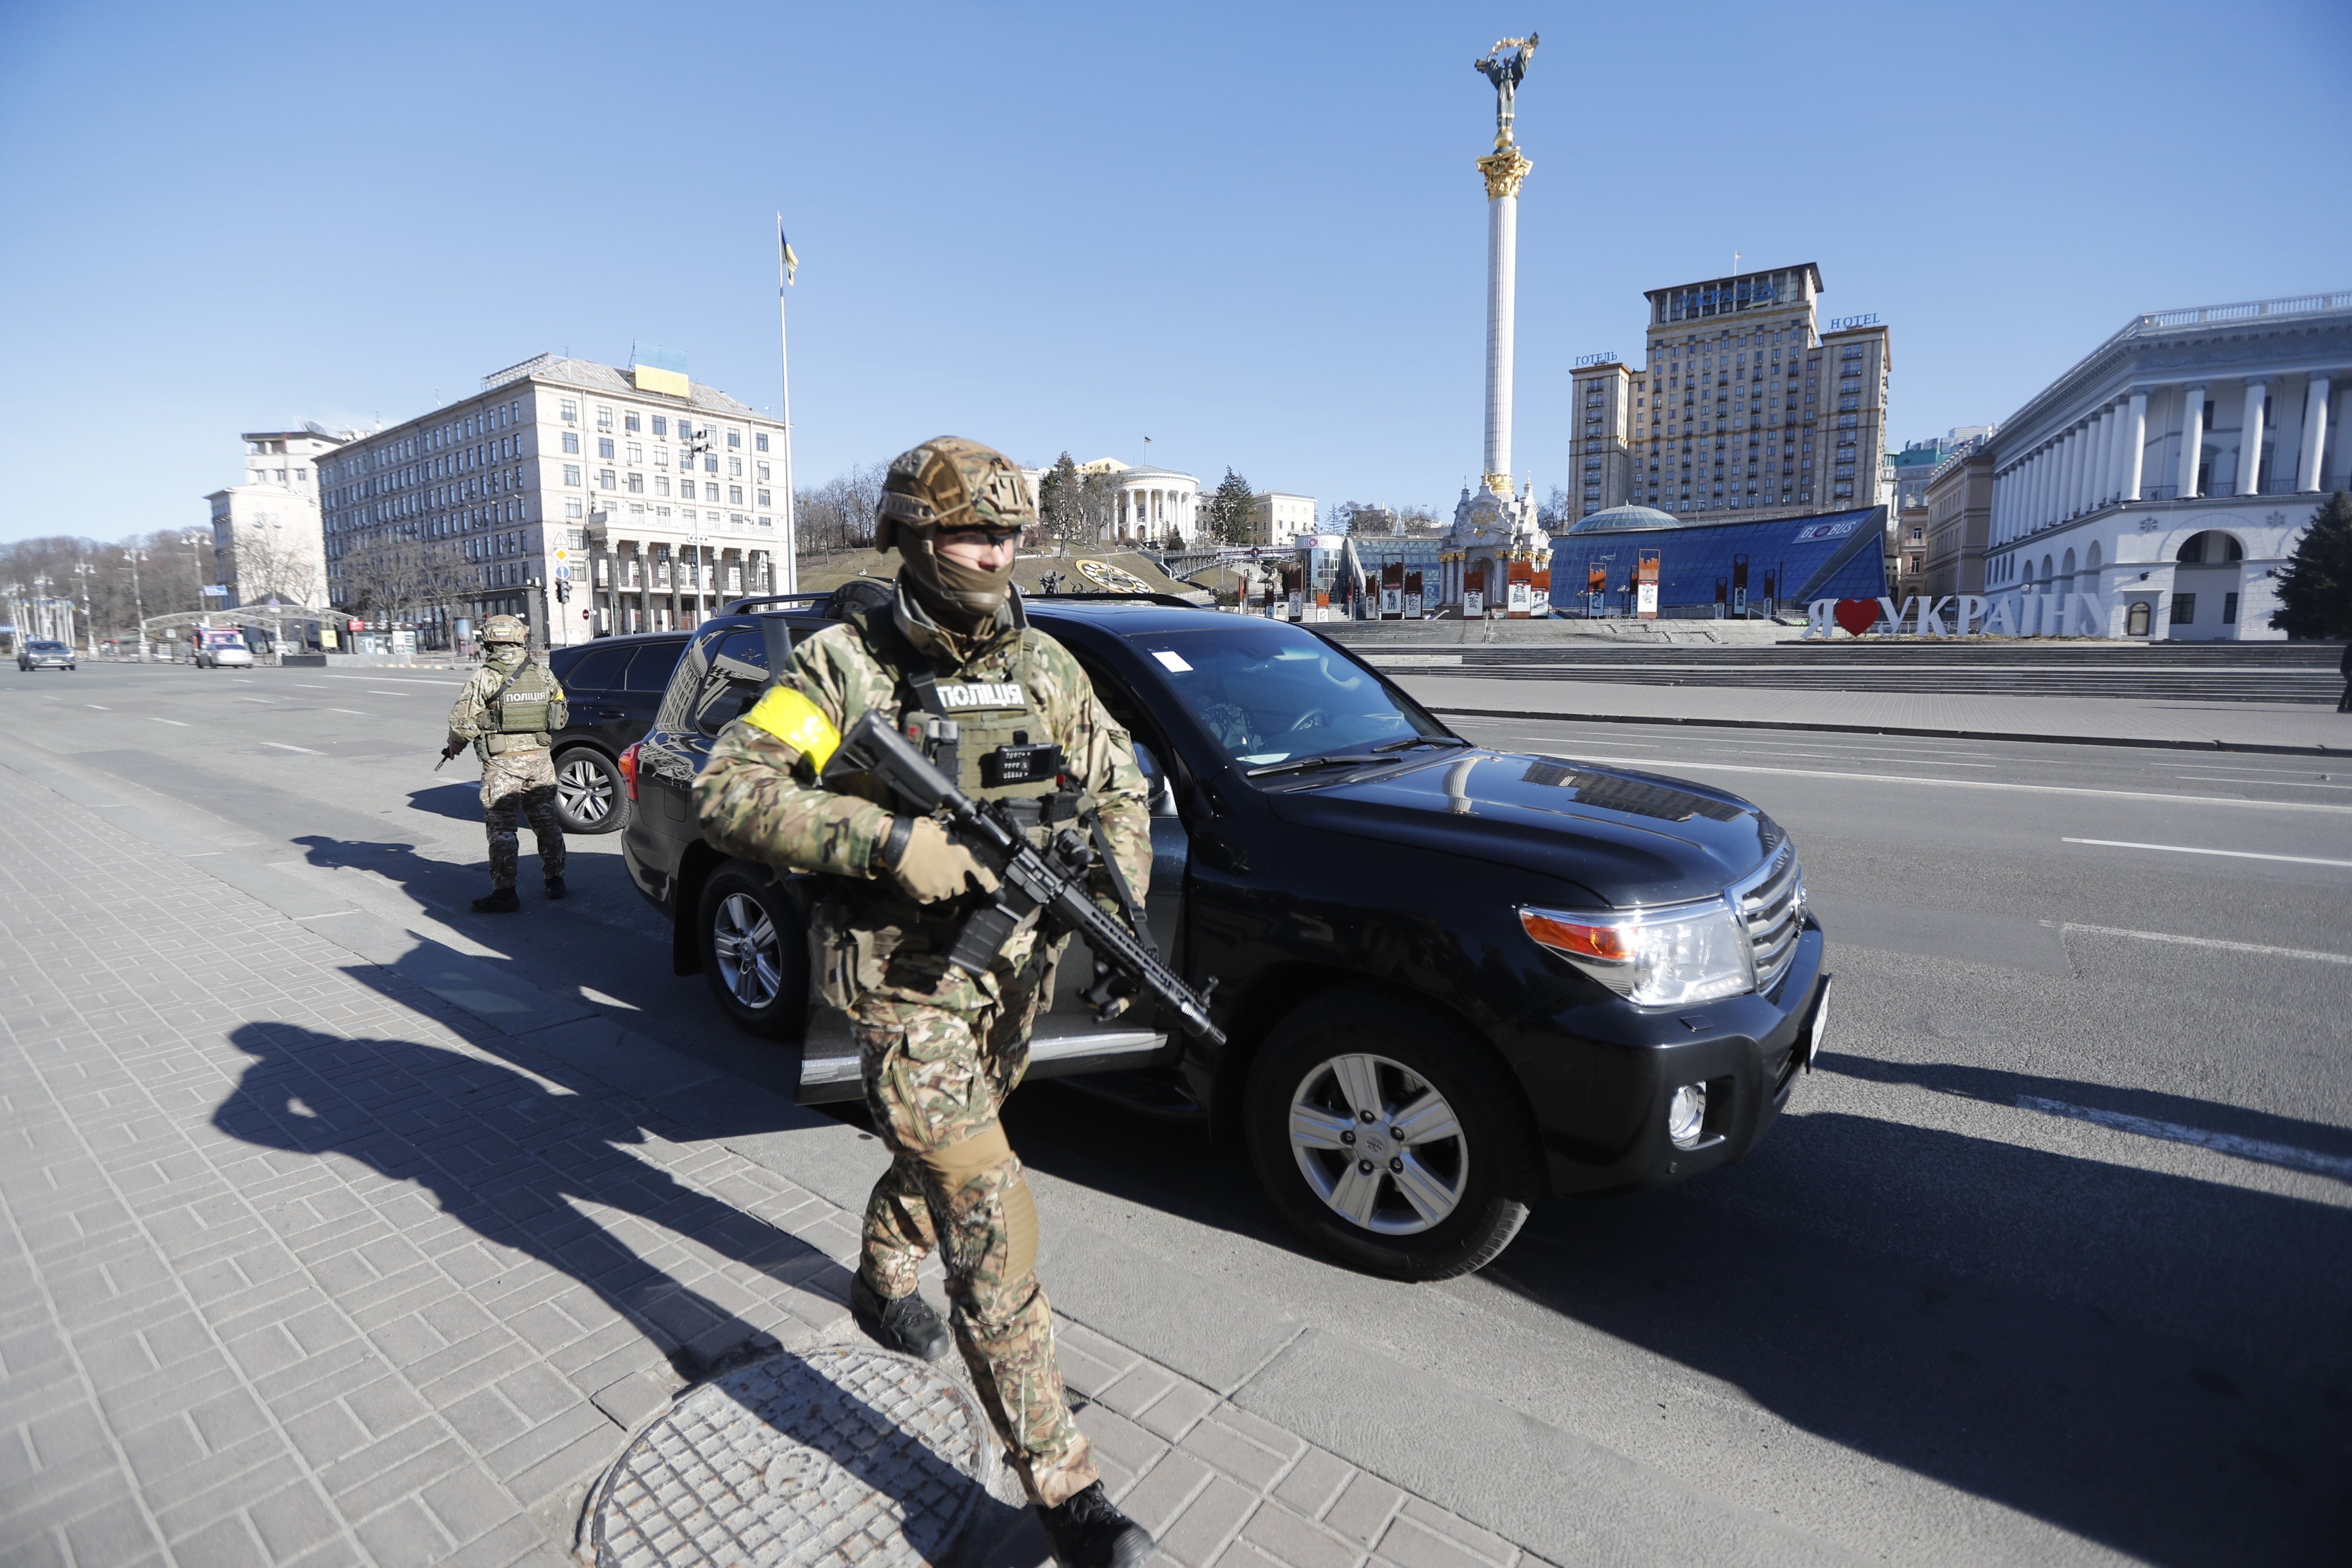 Ukrainian soldiers patrol the Independence Square in Kyiv on Monday. Photo: EPA-EFE